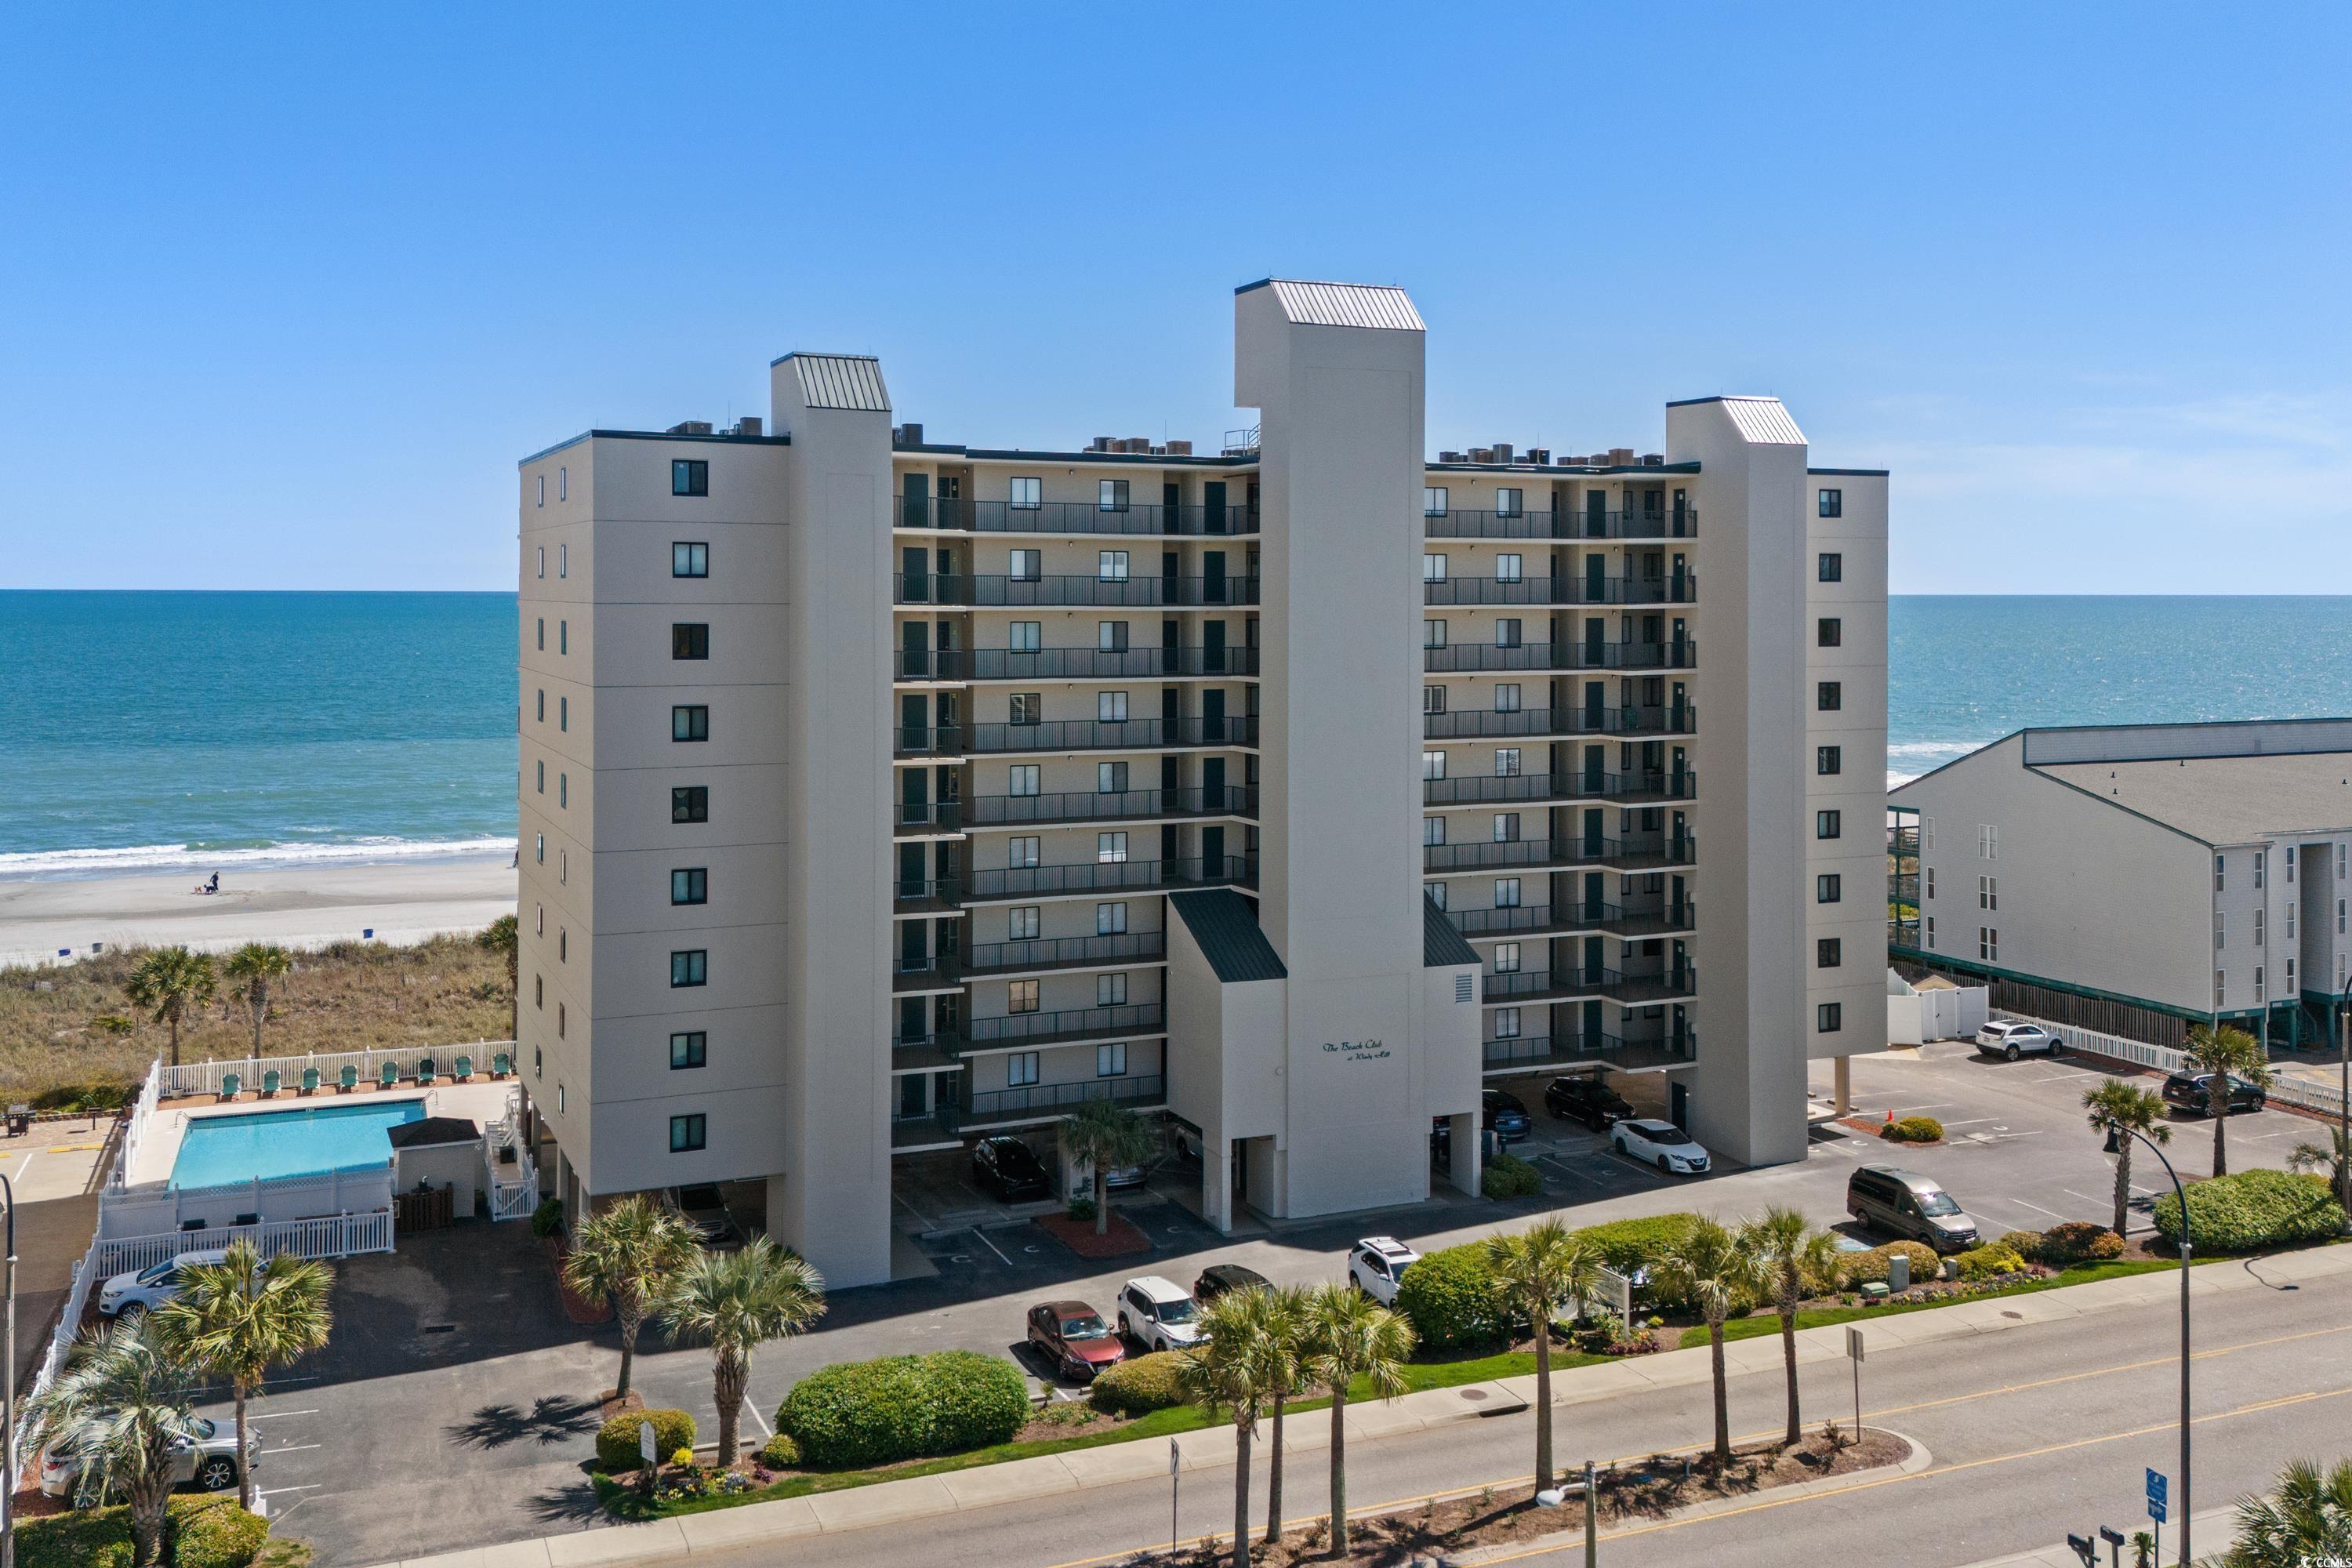 rare opportunity to own this end unit direct oceanfront 4br/3ba penthouse condo on the 9th floor at the beach club of windy hill.  endless unobstructed views of the northern and southern coastline from this property are truly magical and span as far as the eye can see. on any given day, enjoy views of the myrtle beach sky wheel or the serene sandy shores of cherry grove beach from your private 30' balcony. the grand balcony has an overhang that offers options for shade or sunlight at your pleasure. this seaside splendor presents just under 1700 sq feet of ultimate comfort for coastal living with generous room sizes, full size washer/dryer, large kitchen with bar, and open concept design. there are many windows that frame the breathtaking ocean views. step into a generous foyer, providing ample space for showcasing artwork and features a spacious interior storage room for all of your beach gear and supplies.  a luxurious direct oceanfront primary suite with walk-in closet has a private bath with separate shower, jacuzzi tub with double vanity.  the secondary bedroom is an ensuite with it's own private full bath. the other 2 bedrooms share a true jack-and-jill bathroom. a kitchen with room for multiple cooks has bar seating, lots of cabinetry and pantry.  the dining and living area is spacious and provides versatile options for furniture arrangements. some furnishings will convey and these original owners have never rented this property. the beach club of windy hill sits proudly on 5 oceanfront lots which allows homeowners to relish a more expansive beachfront footprint to enjoy the sun and the sand. there is also a deeded overflow parking lot across the street for family and friends.  owners are welcomed to have pets.  the large in-ground pool is conveniently heated in most off season months and there is a grilling area with picnic tables and community herb garden. if you crave luxurious oceanfront living, spectacular sunrises, incredible restaurants and entertainment nearby, then this property is your own personal oceanfront retreat tailor-made for you. list agent is distantly related to the seller.